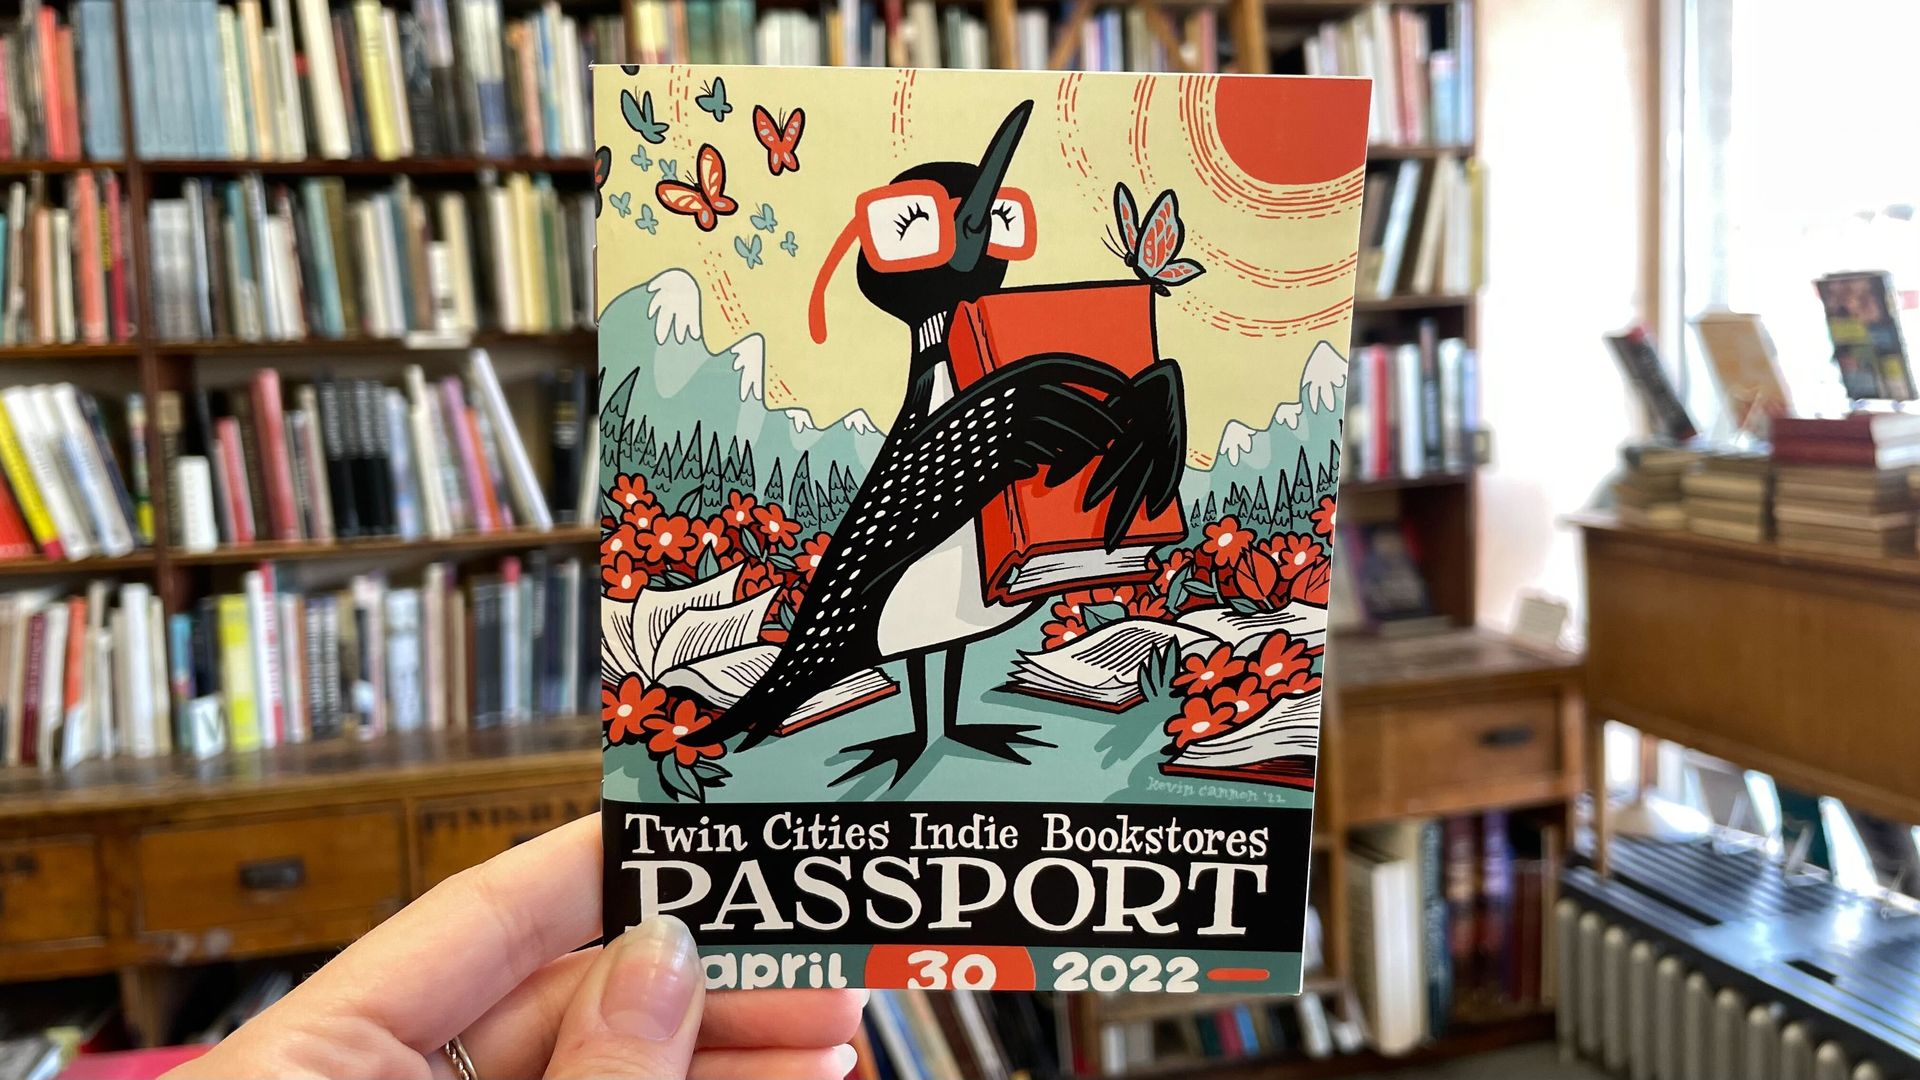 A photo of a Twin Cities Indie Bookstore Passport, which features a bird wearing glasses hugging a book.